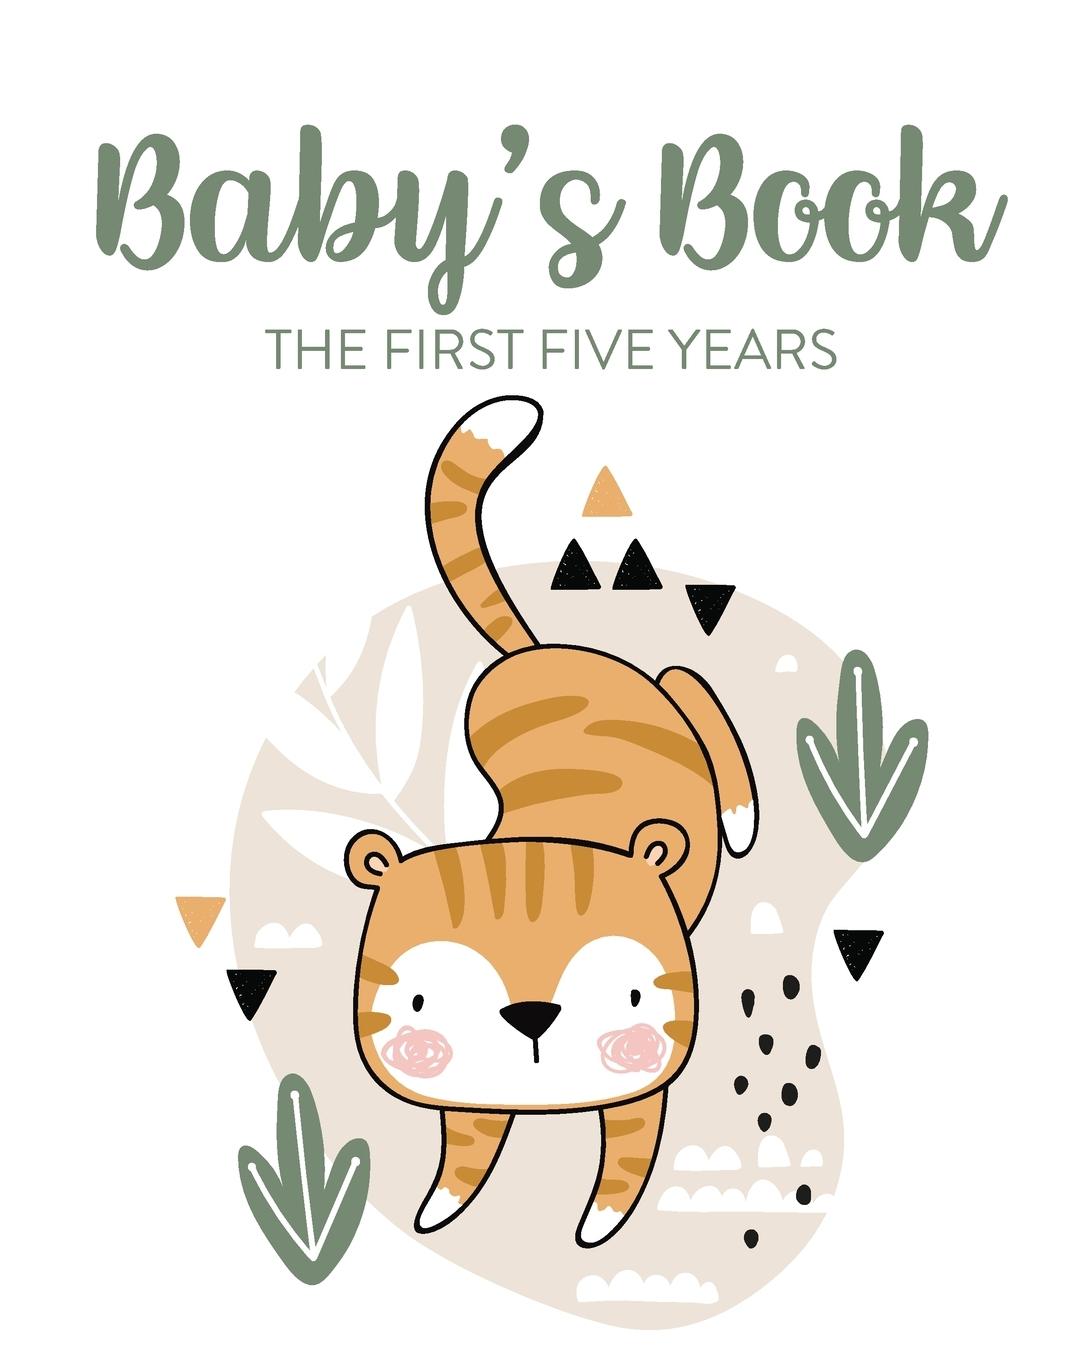 Kniha Baby's Book The First Five Years 